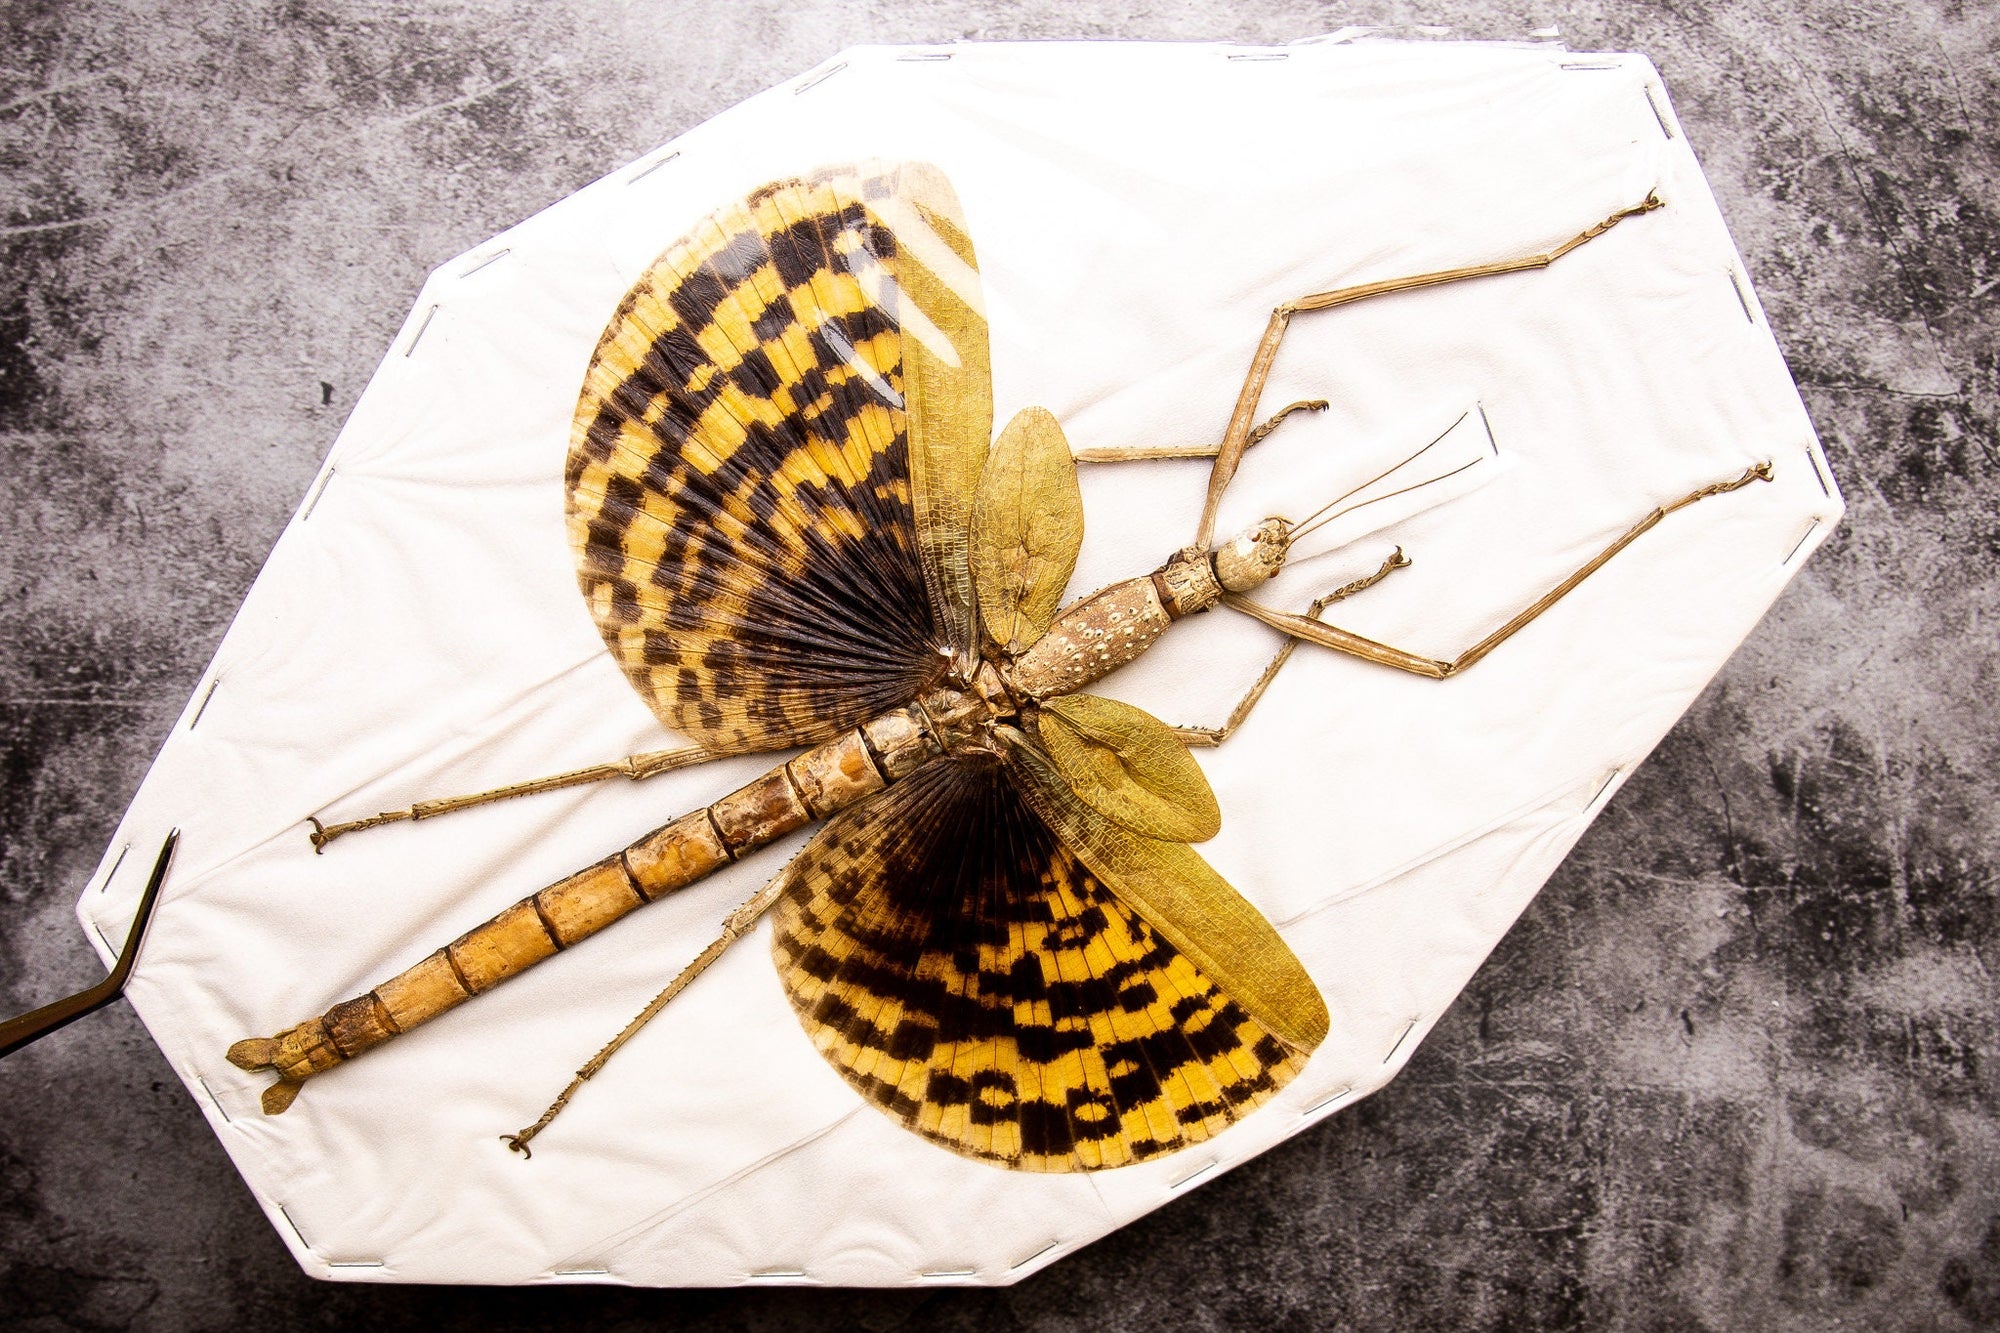 Giant Ghost Stick Insect (Phasma gigas) A1 Real Entomology Taxidermy Specimen from Indonesia